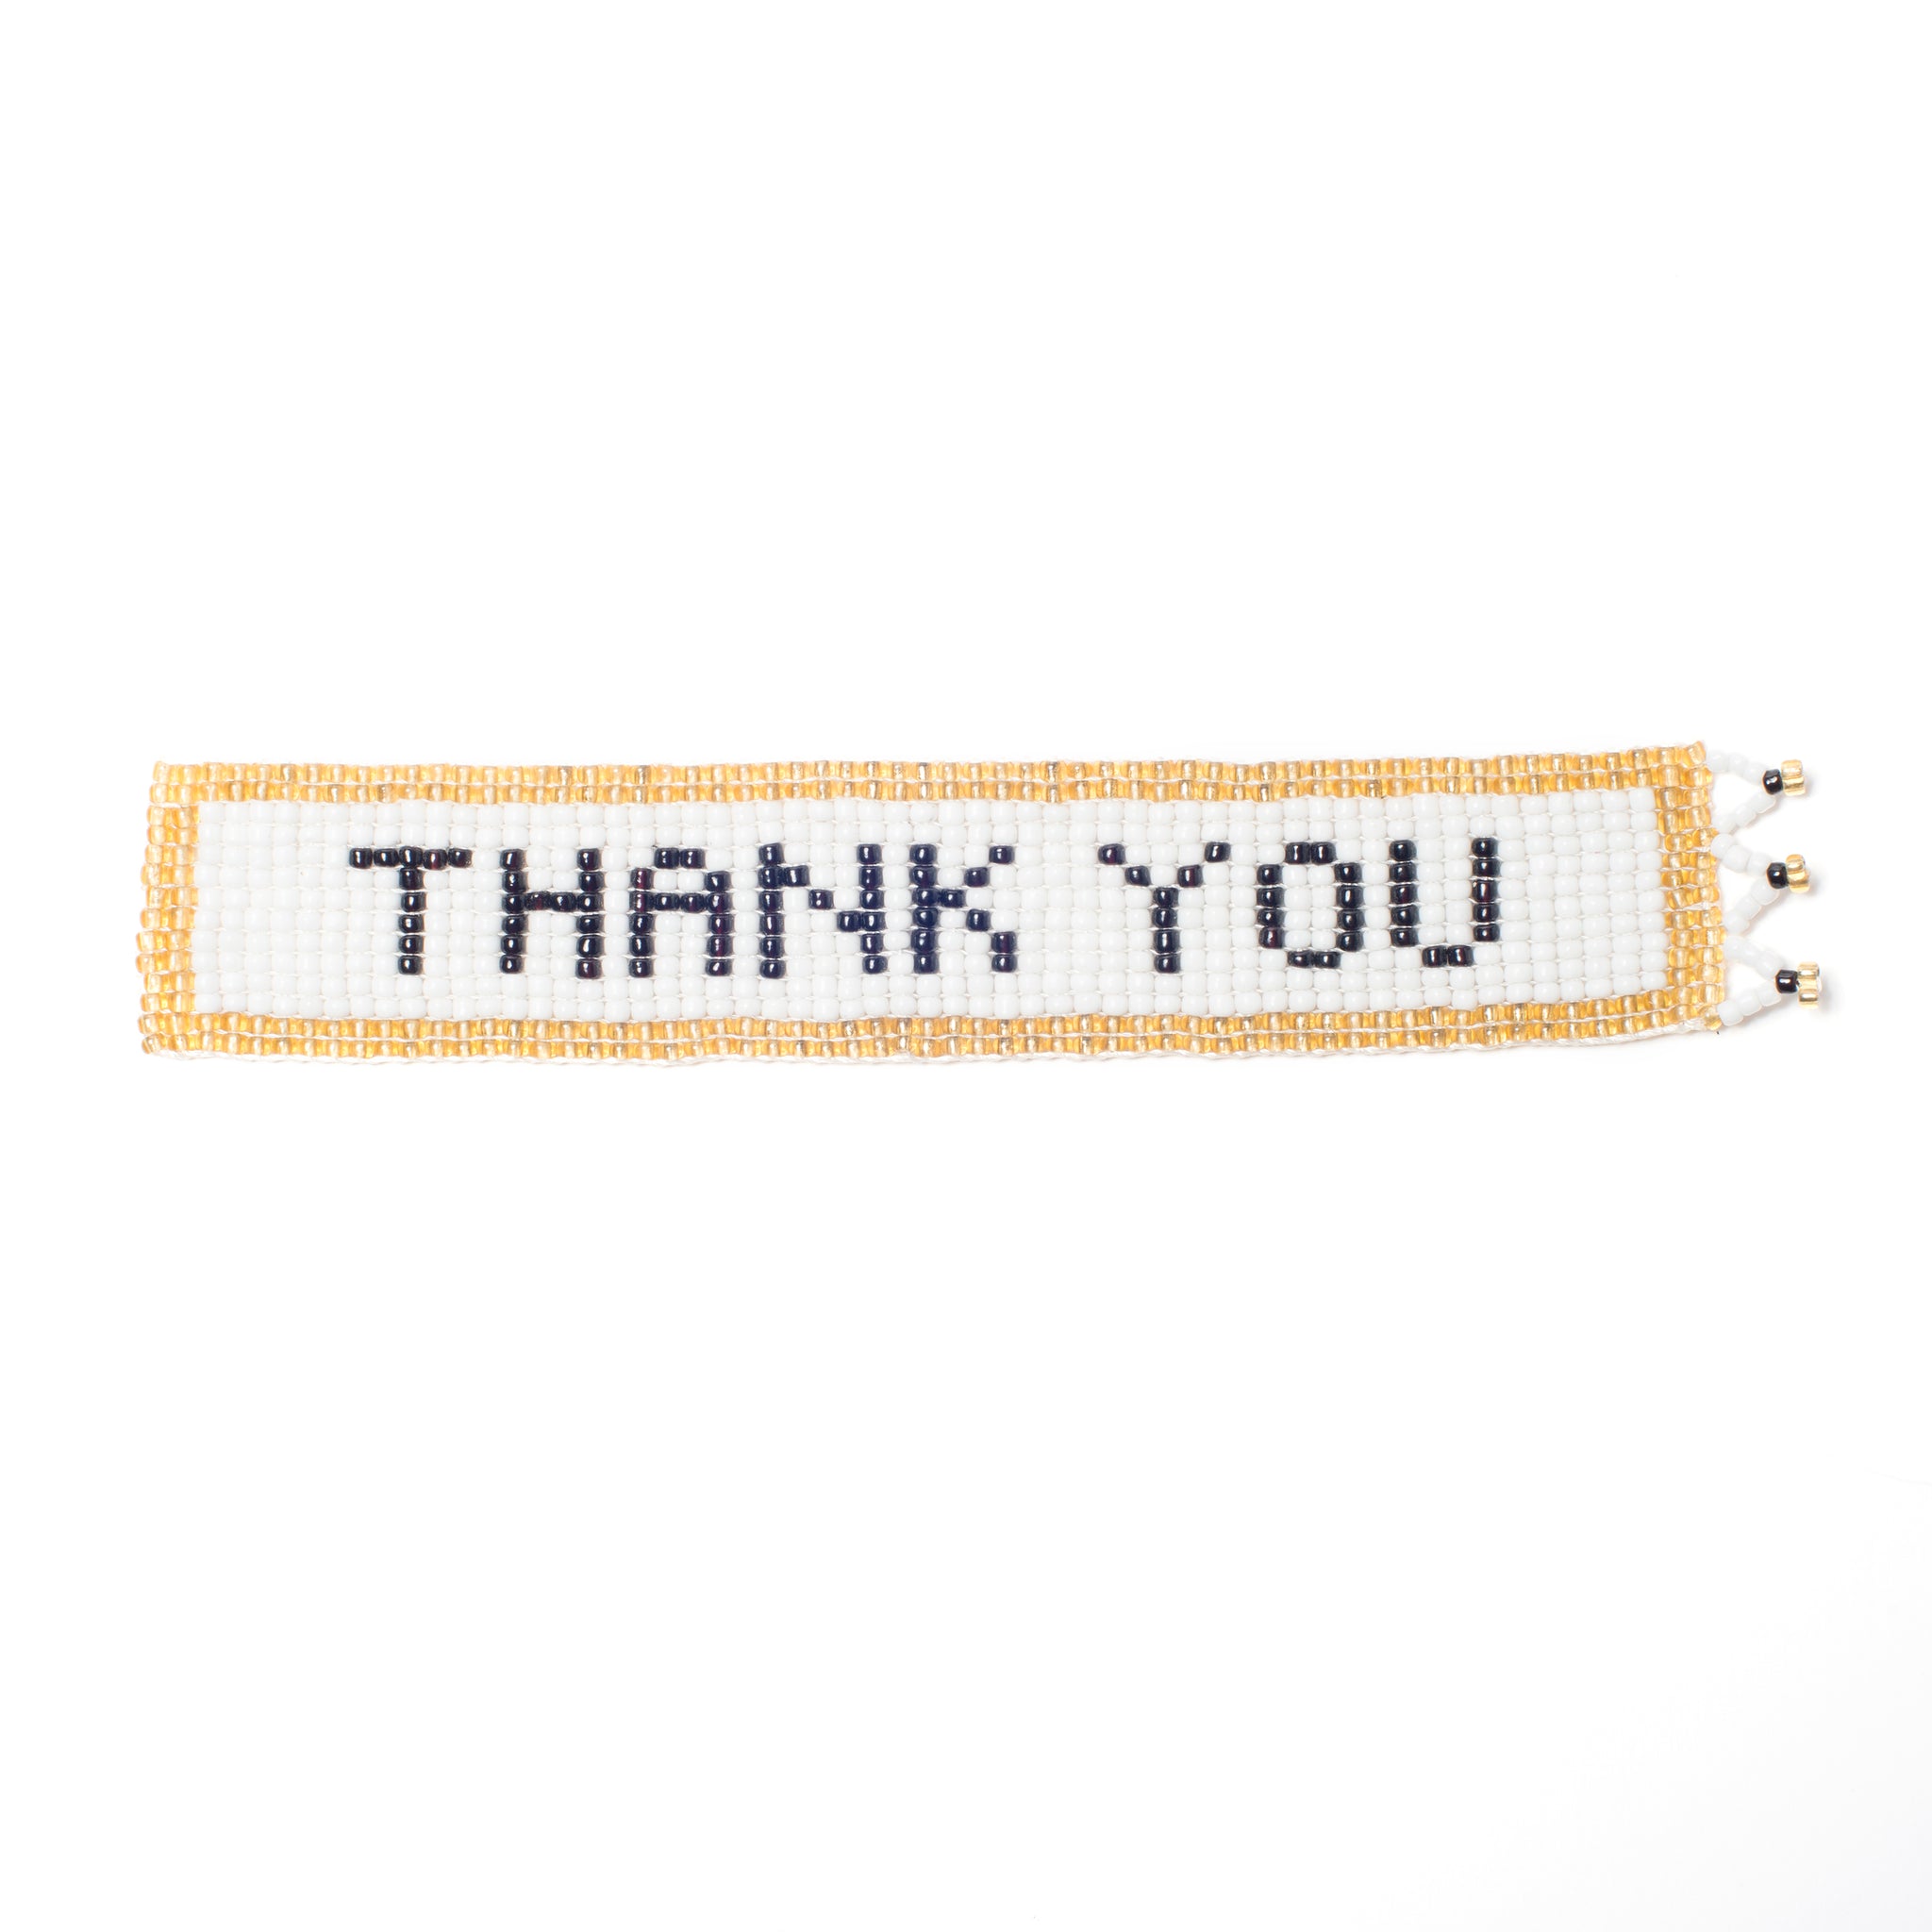 Kidz Positive Beading Project Beaded Bookmark with Thank You Note Gold White Black